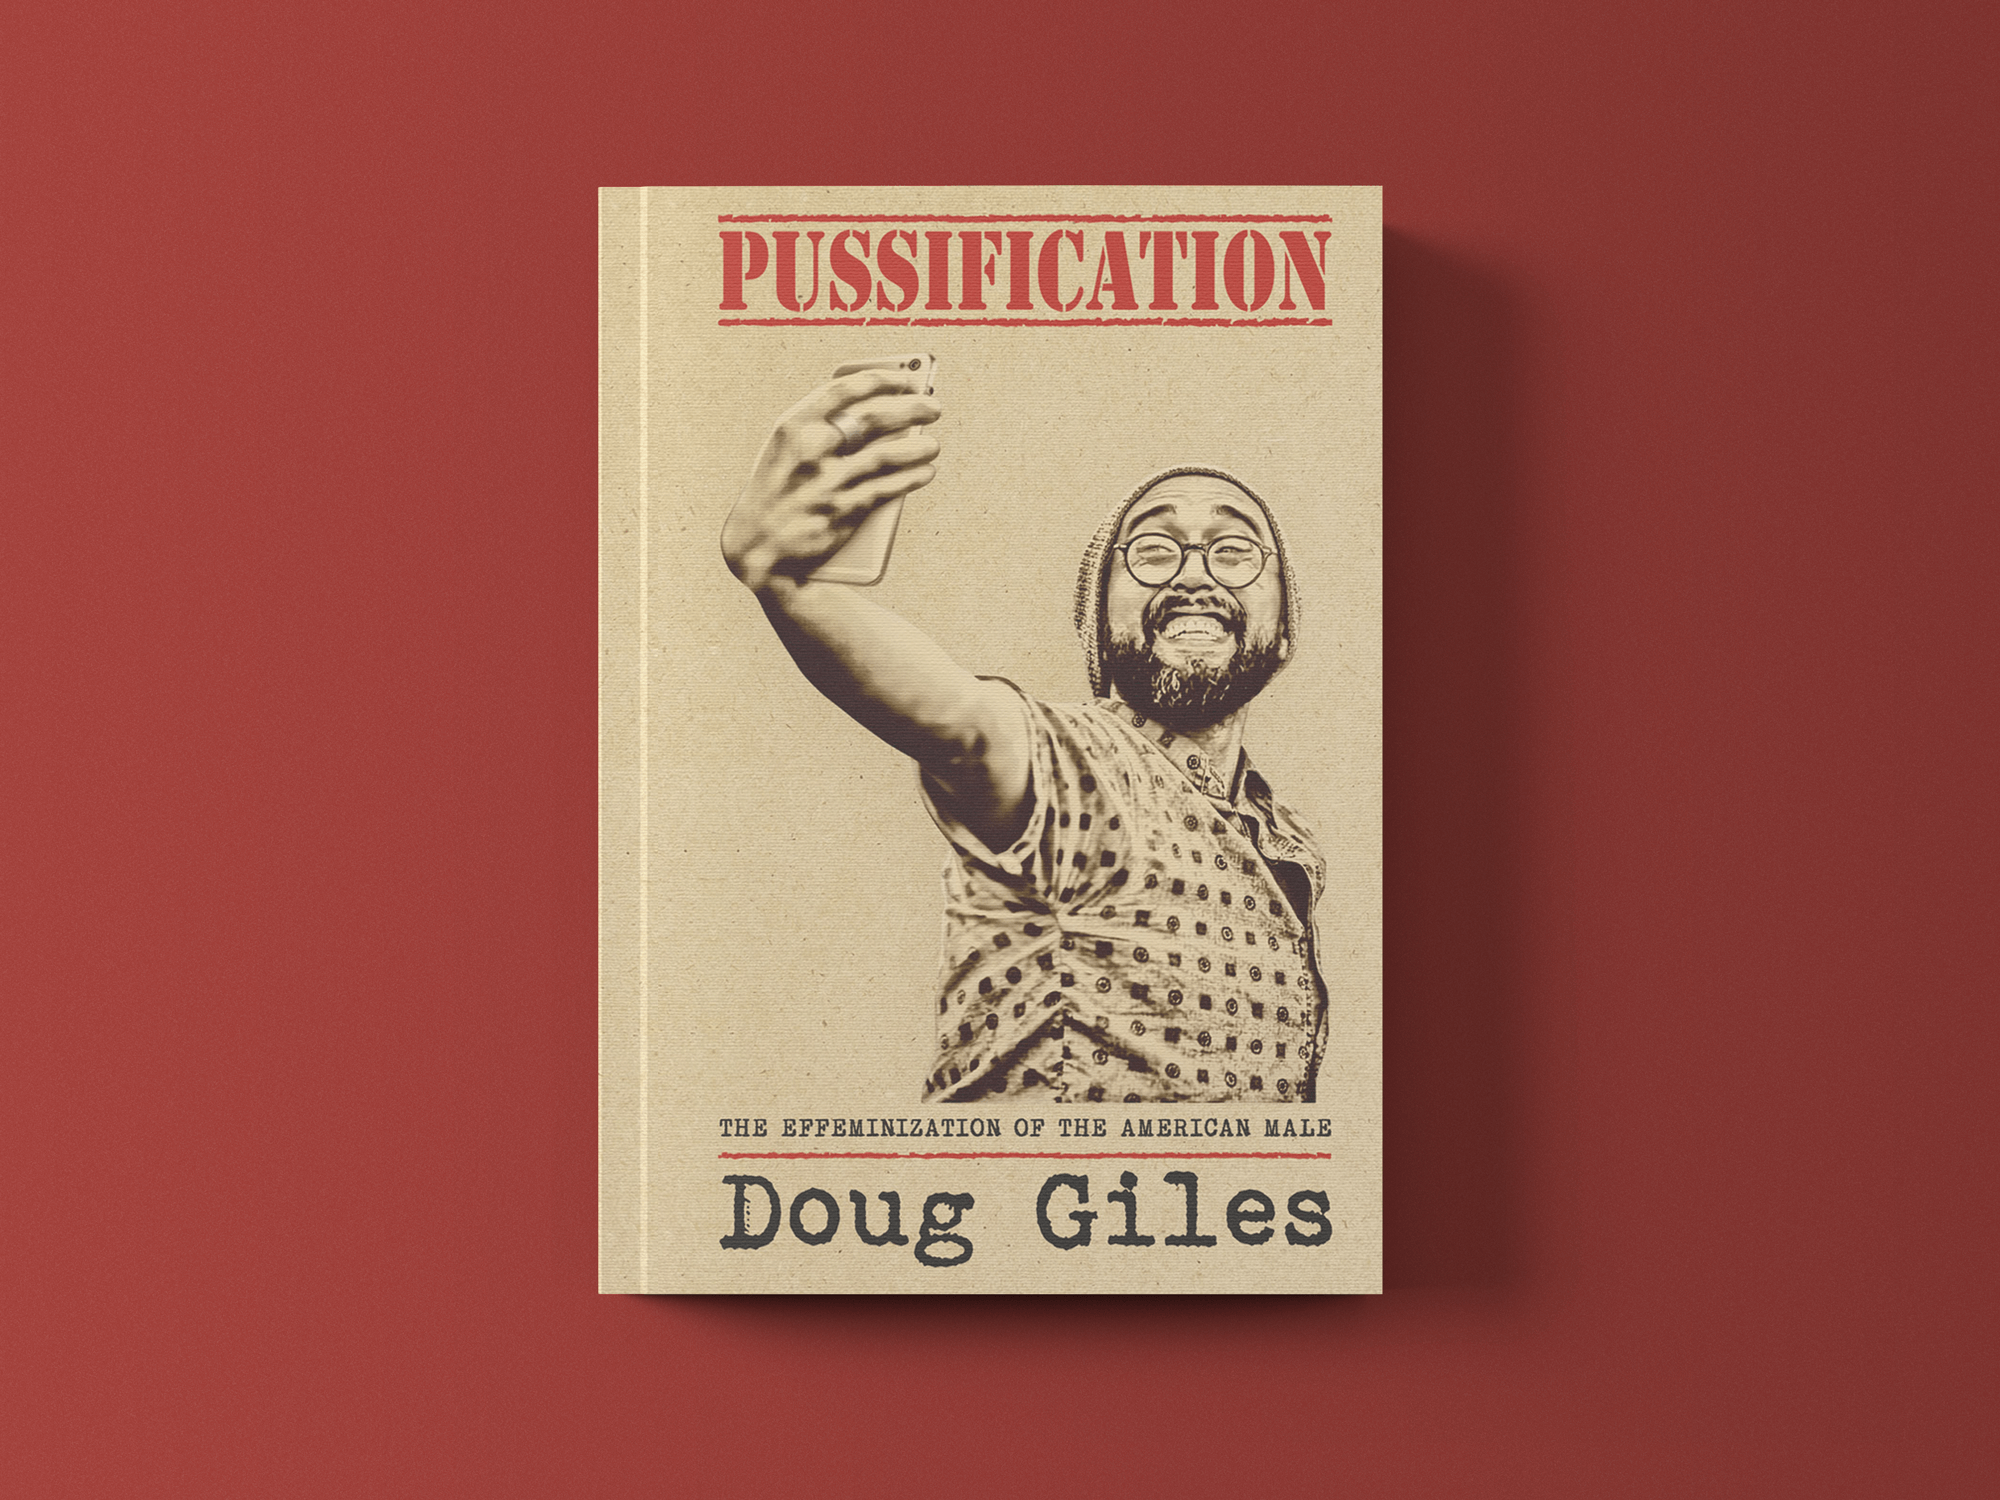 Book: Pussification